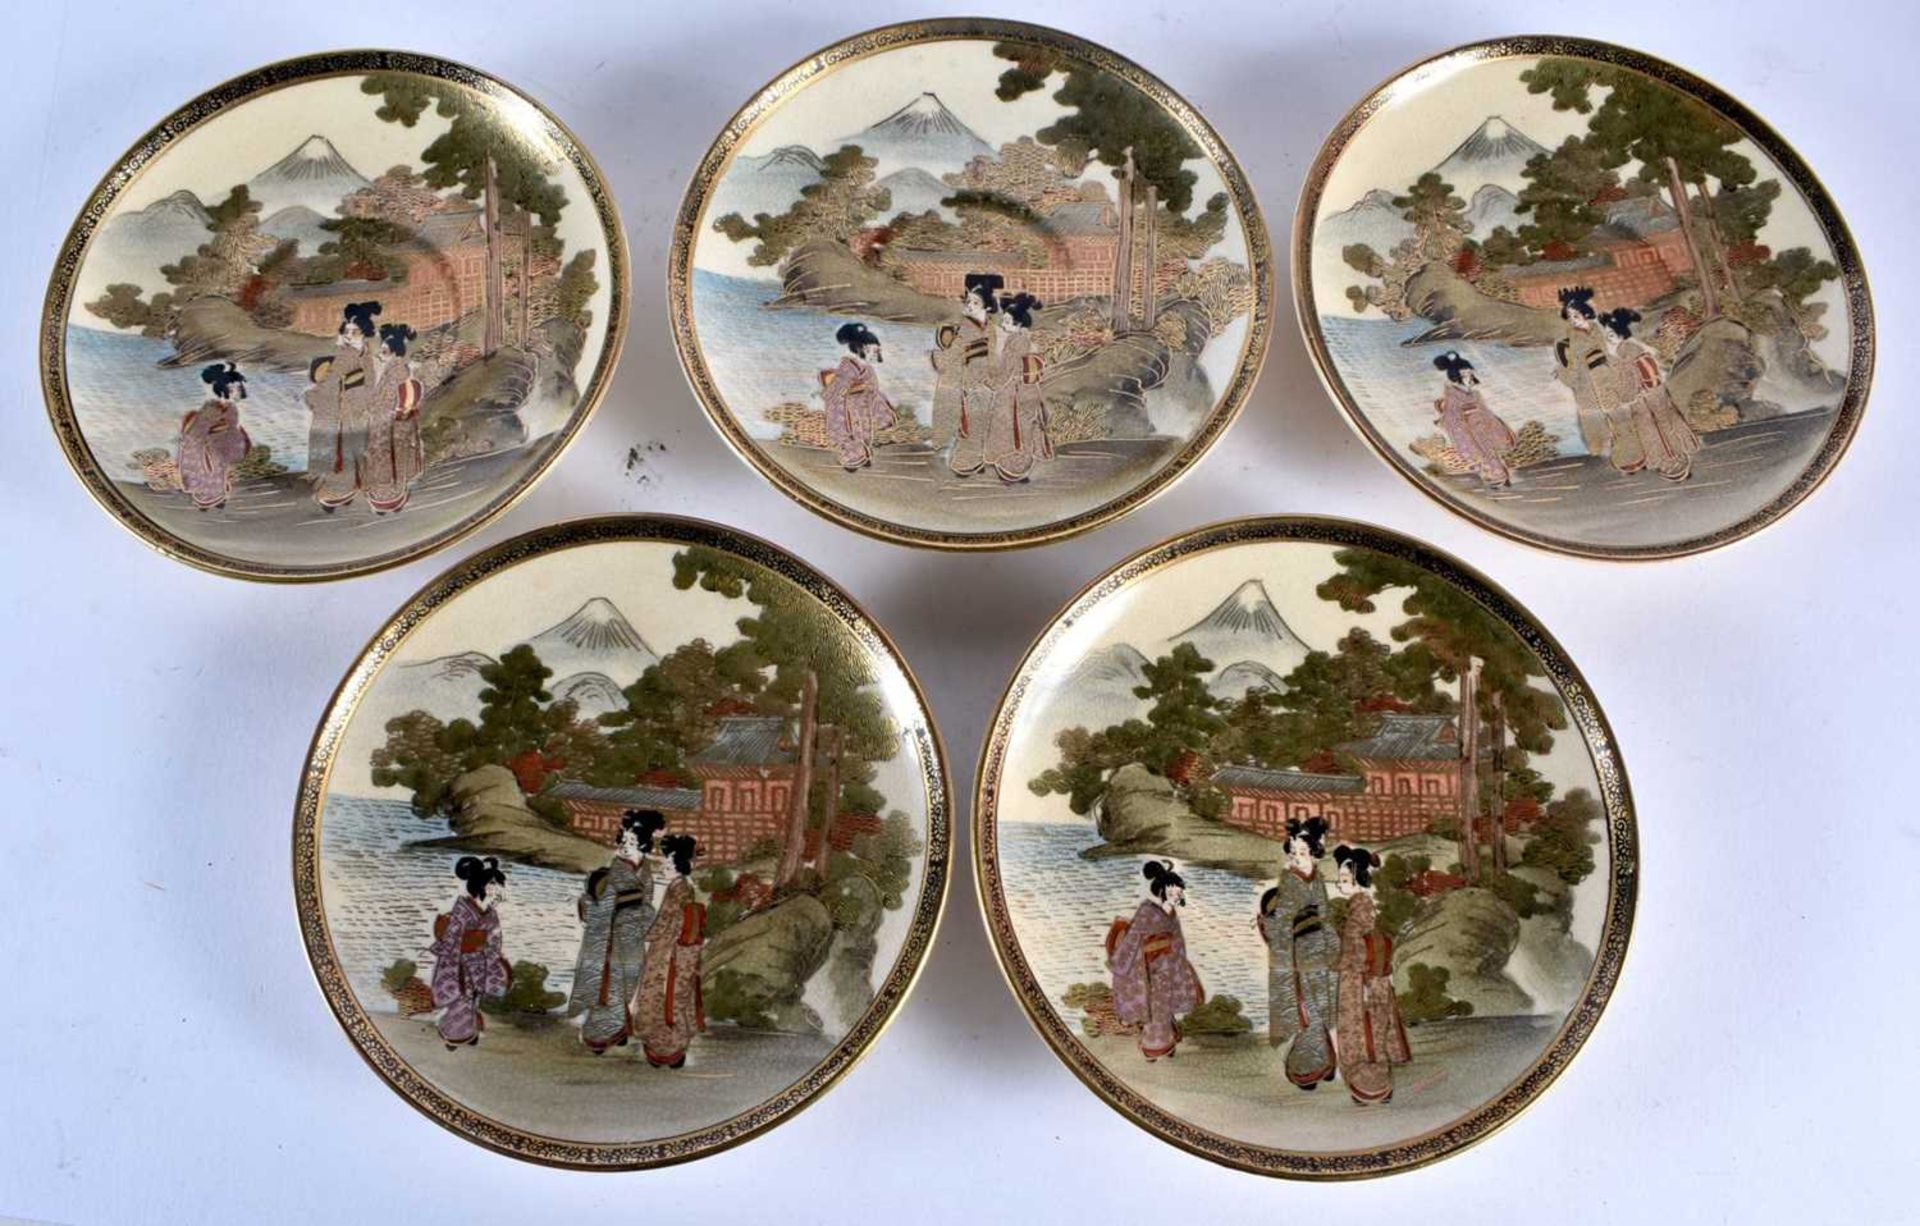 A LATE 19TH CENTURY JAPANESE MEIJI PERIOD SATSUMA TEASET painted with figures and landscapes. - Image 2 of 9